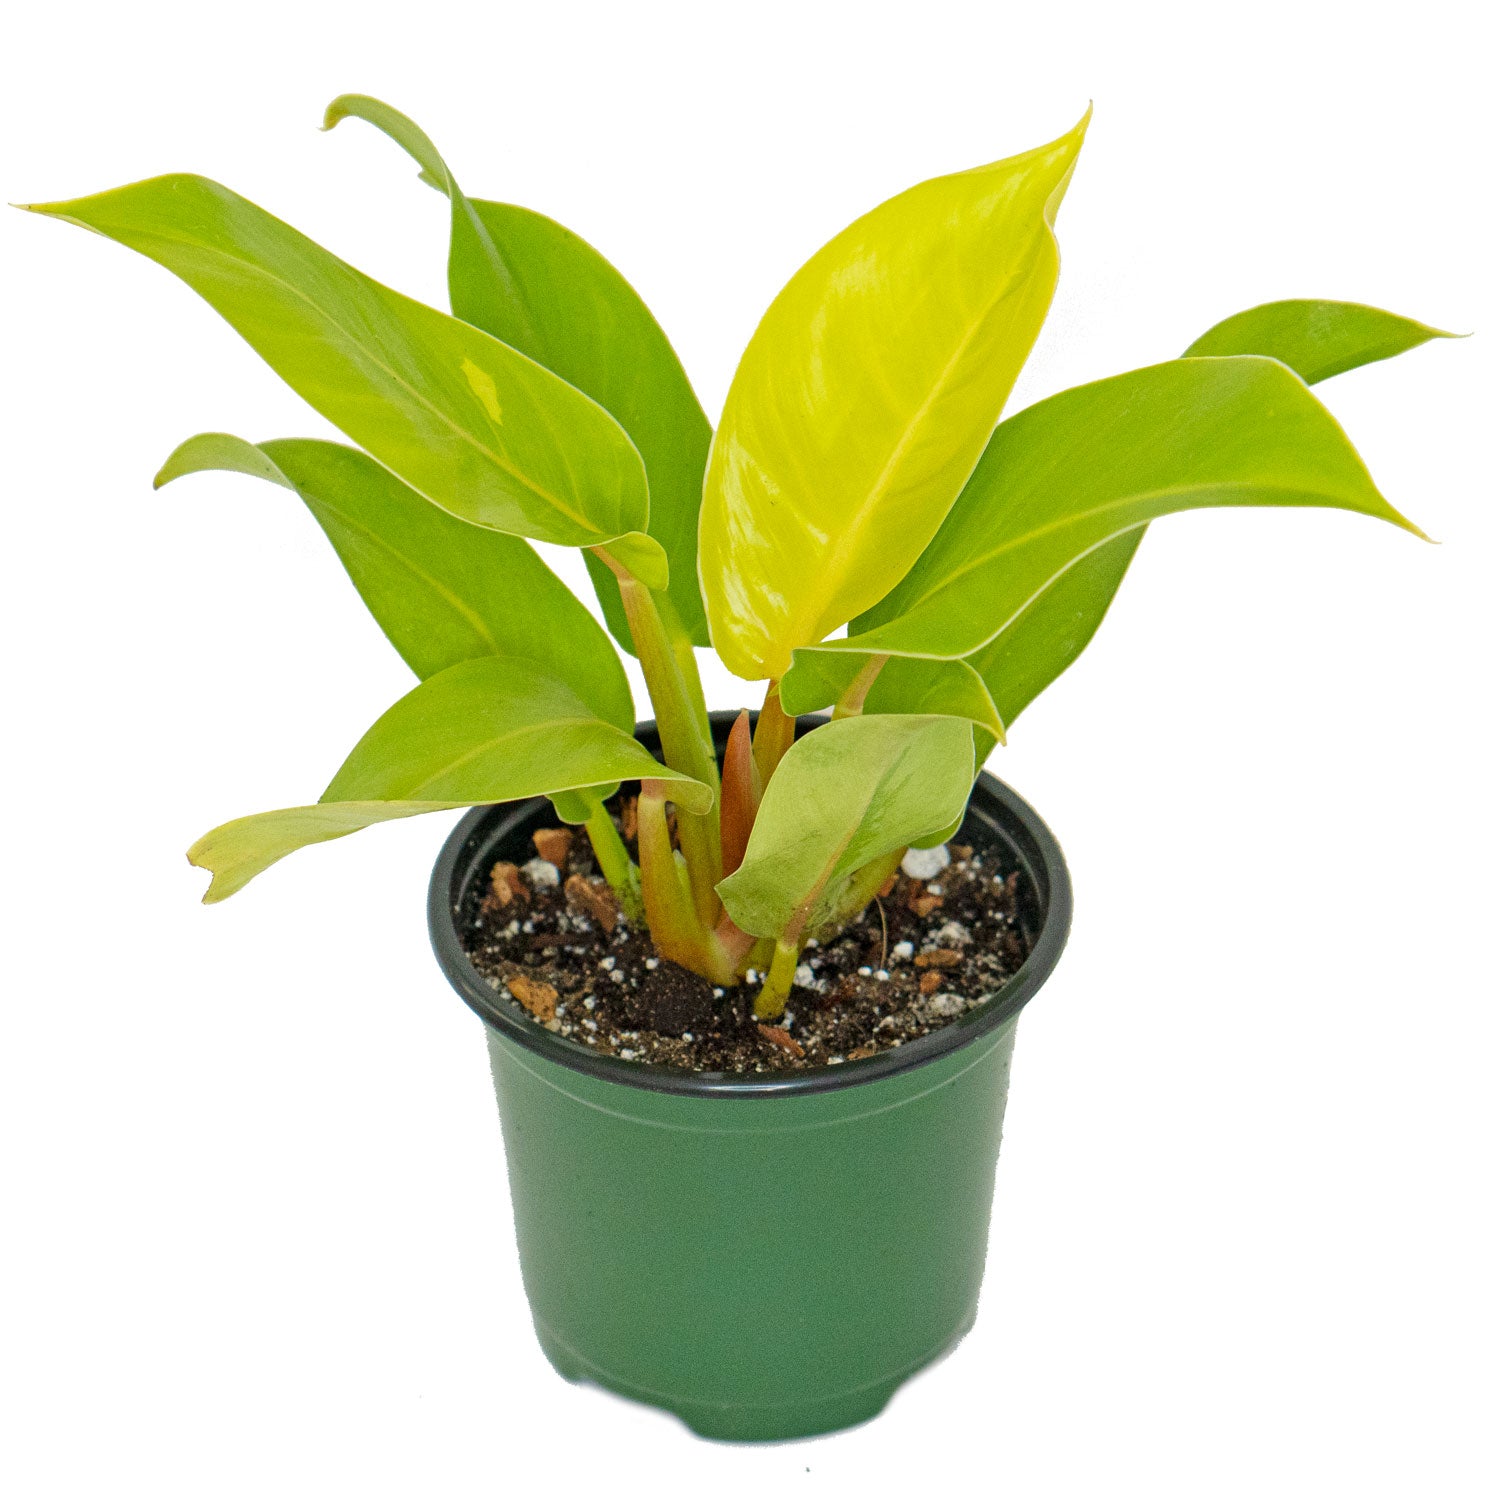 Potted rare Houseplant Phillodendron Moonlight 4.5” - Buy repotted rare indoor plant Philodendron Moonlight for delivery at Planteia